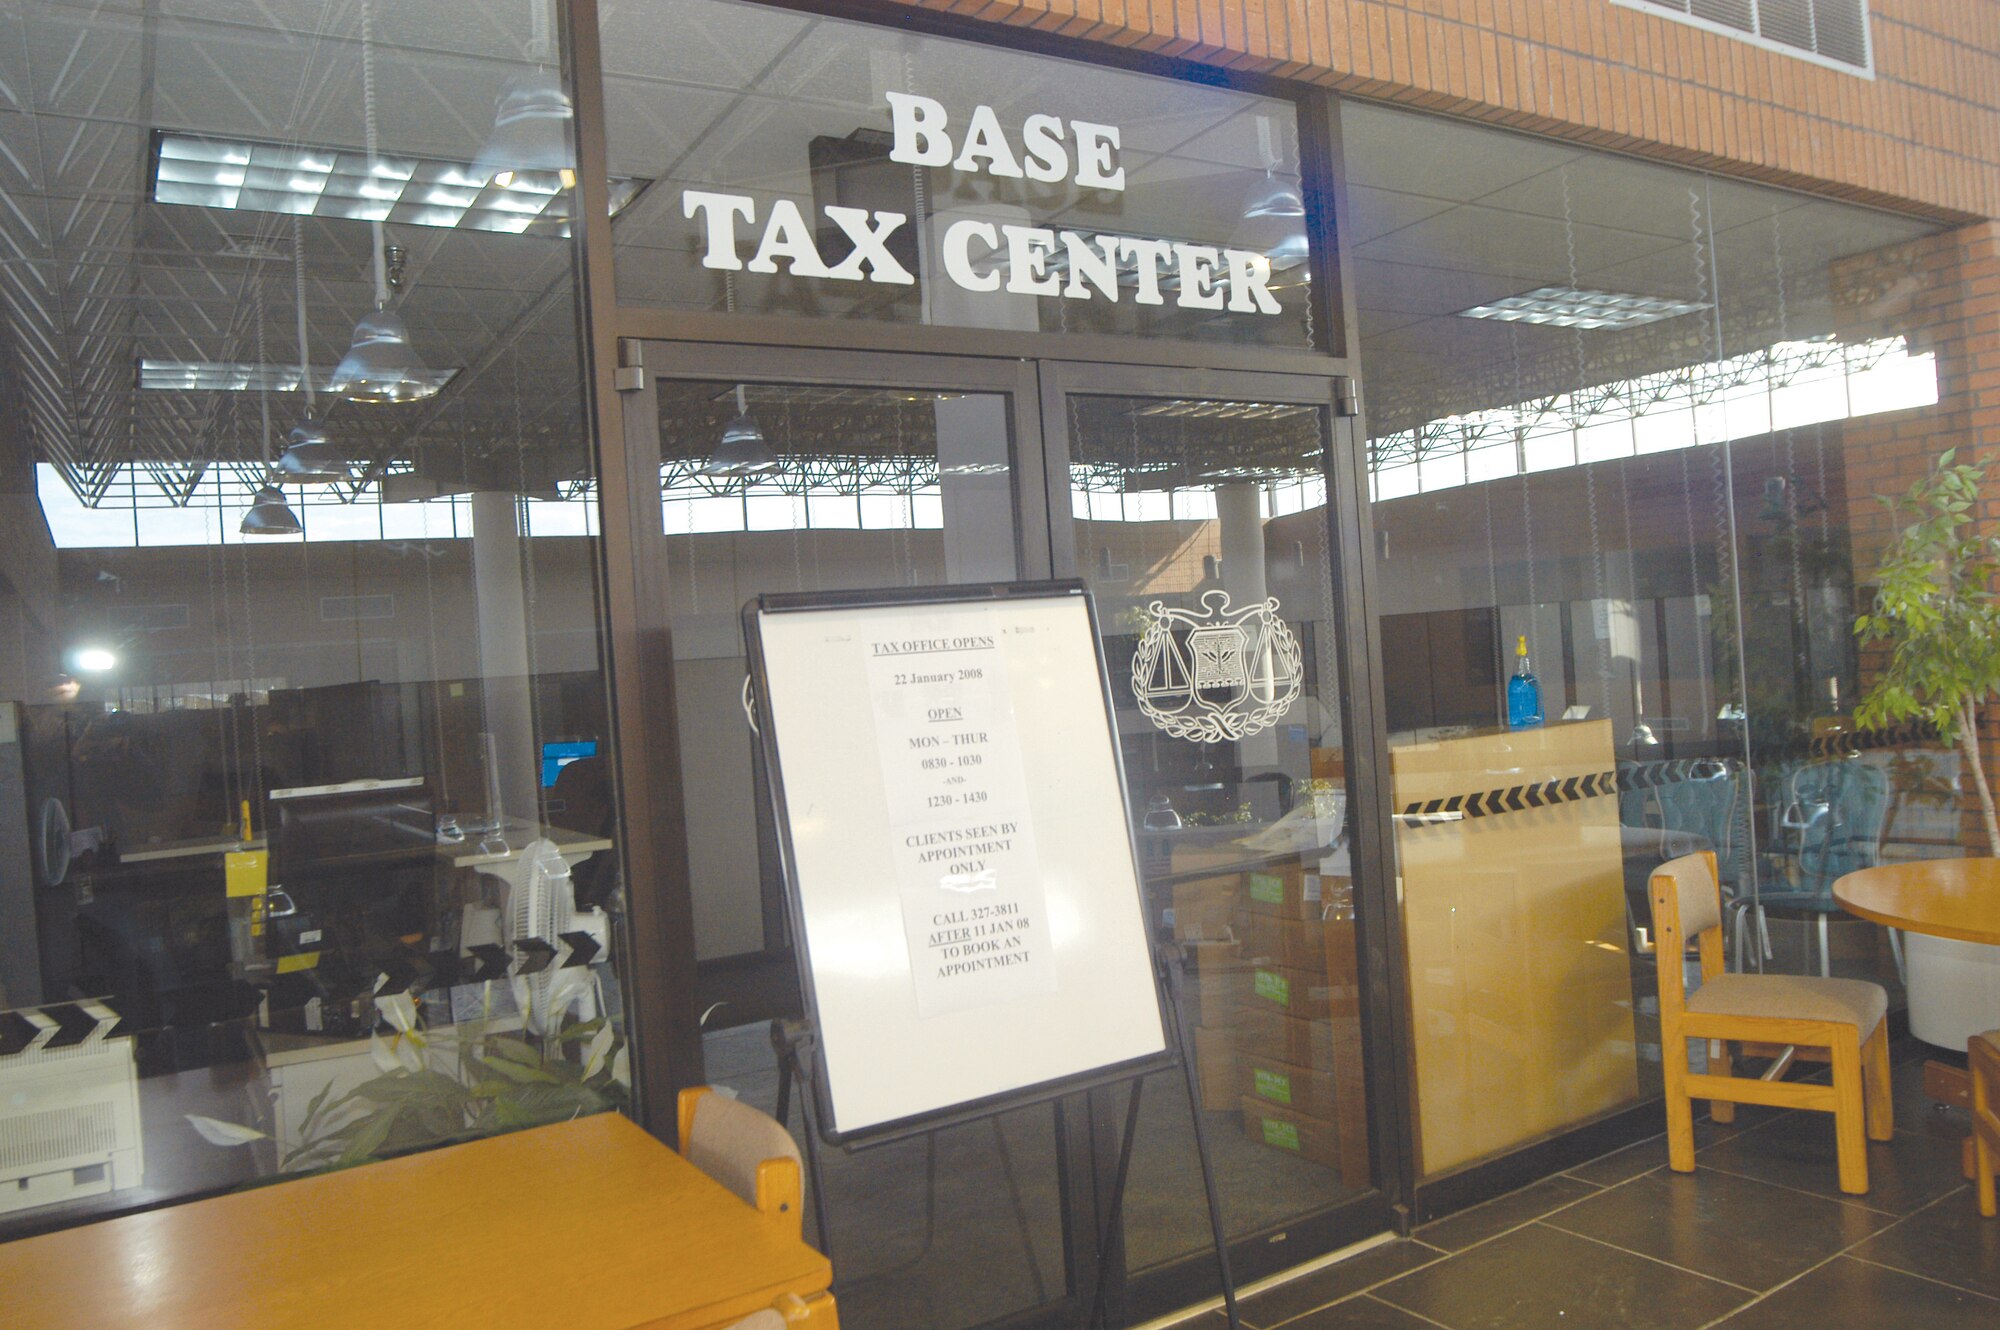 The Robins Air Force Base tax center, located in Building 905 on the second floor of the library, will open for the 2008 filing season January 9. U. S. Sir Force photo by Sue Sapp    